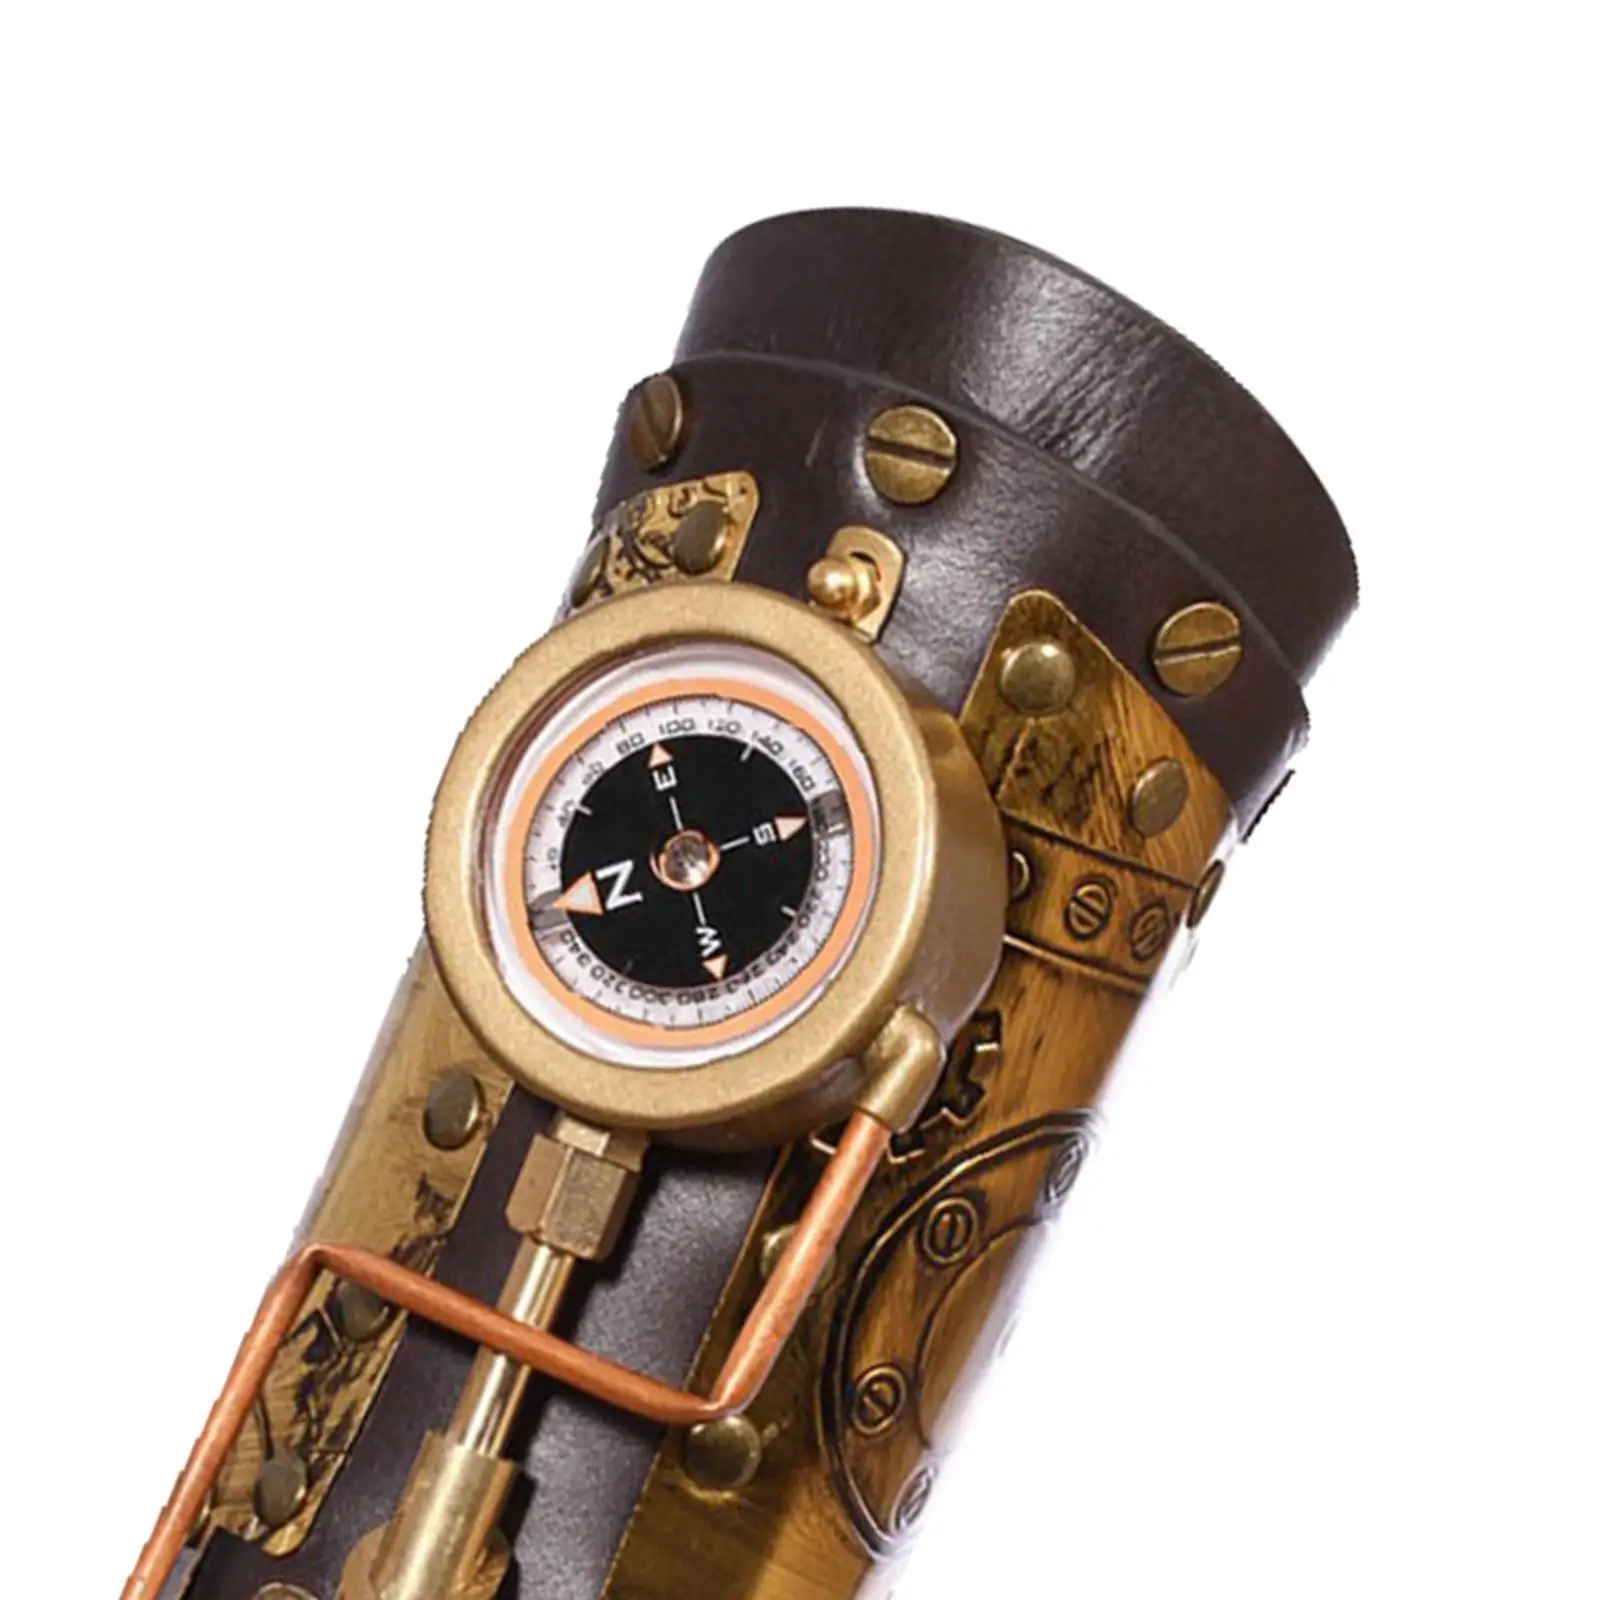 Steampunk Arm Sleeve with Compass Handmade Adult Props Reusable Wrist Guard for Punk Cosplay Carnival Halloween Festive